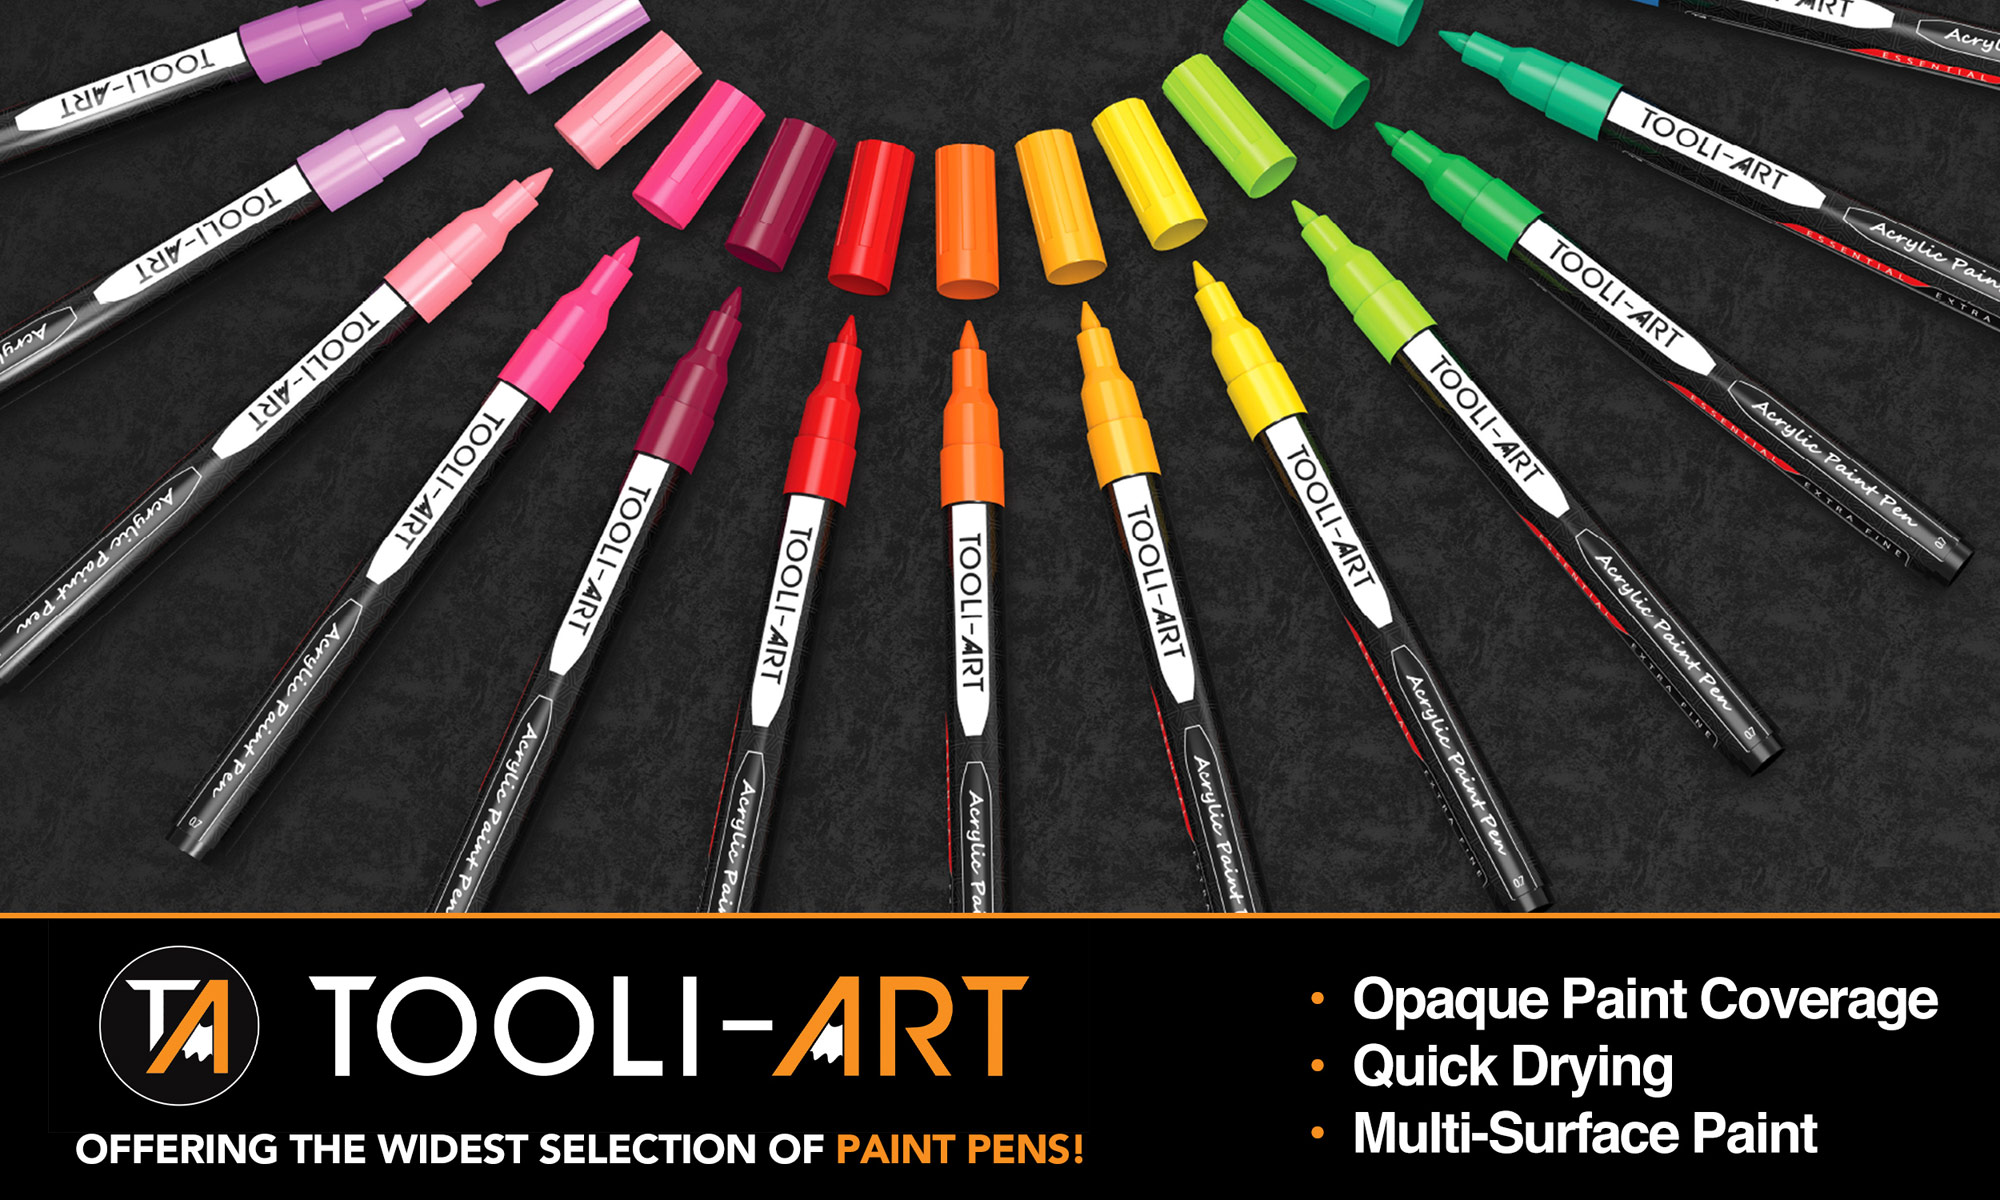 Tooli-Art Paint Marker Sets. Offering the widest selection of paint pens! Opaque Paint Coverage. Quick Drying. Multi-Surface Paint.